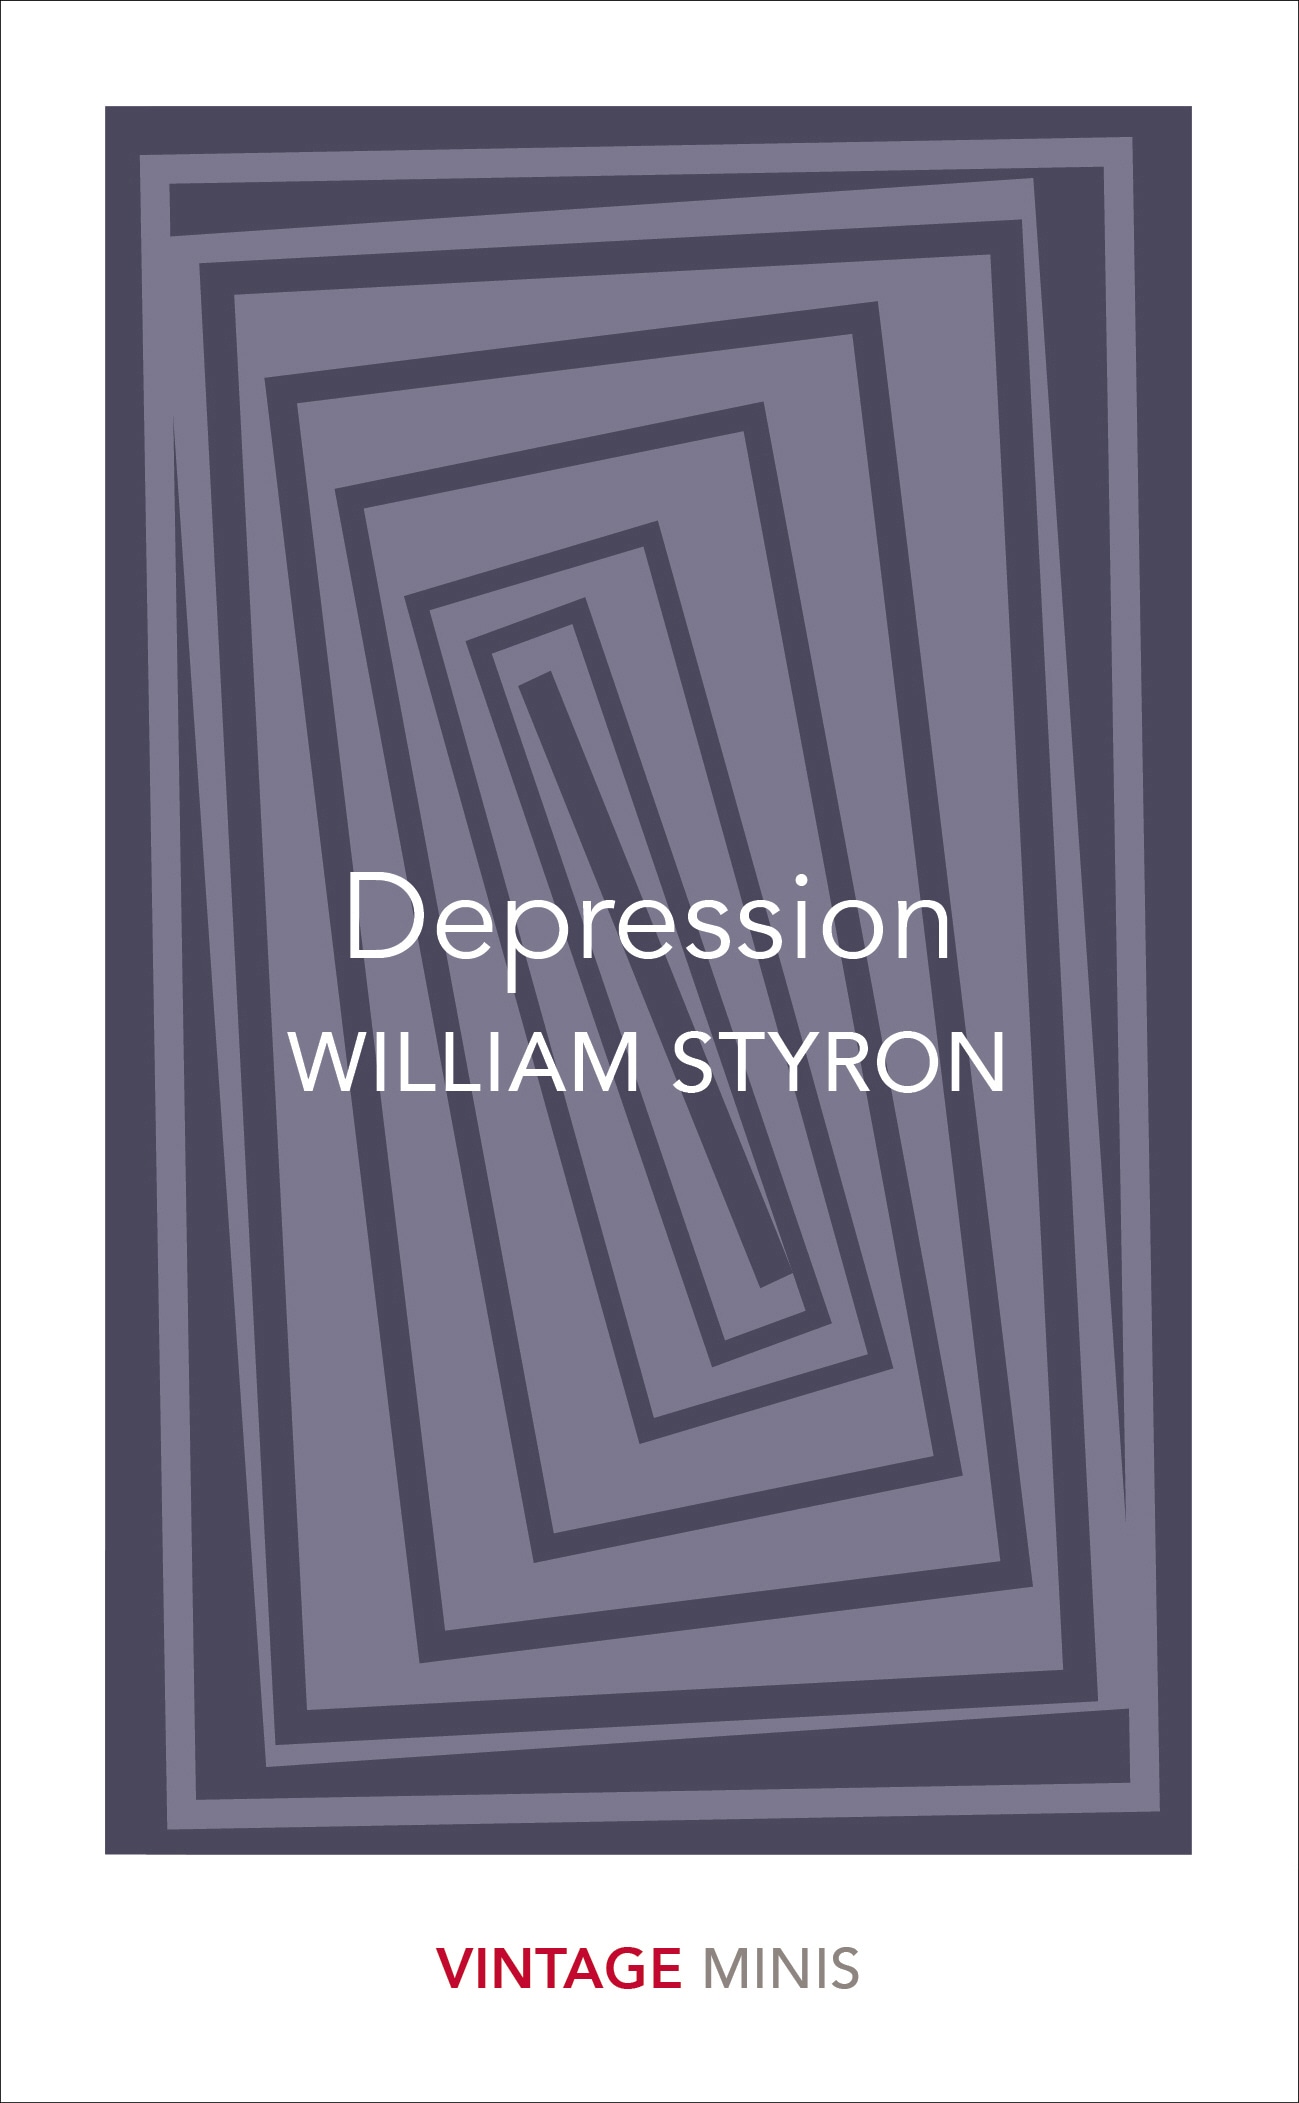 Book “Depression” by William Styron — June 8, 2017